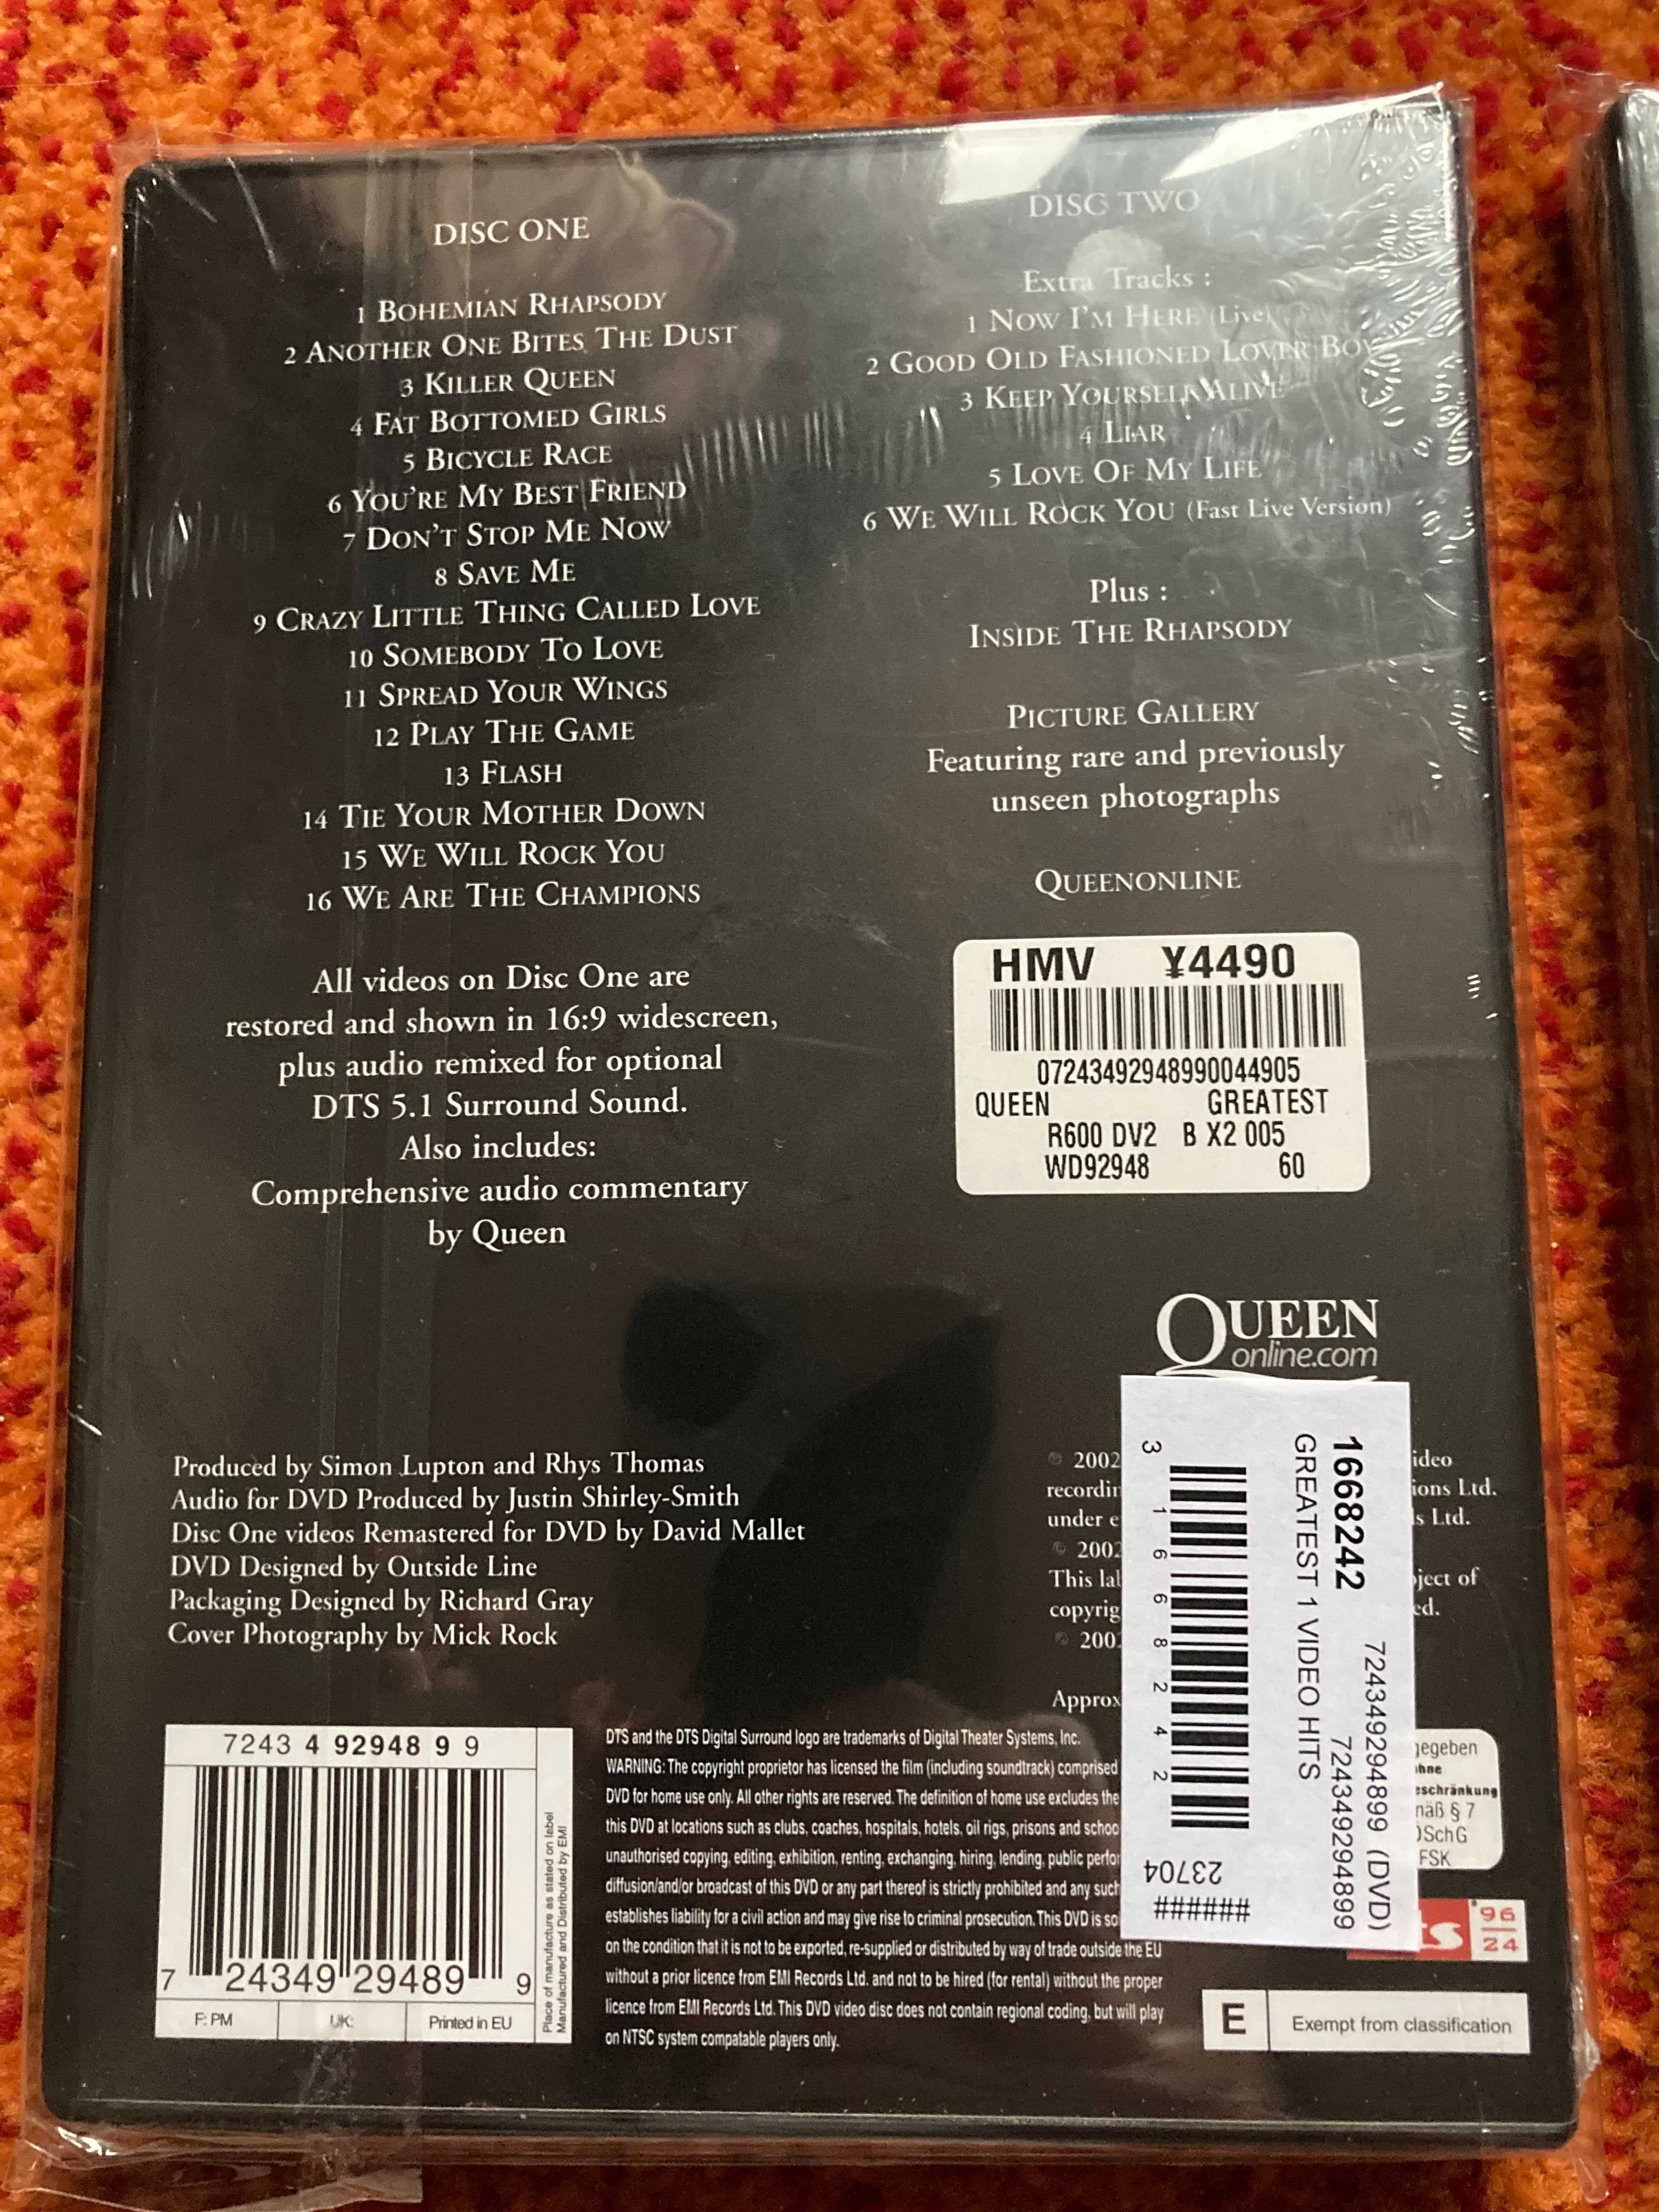 DVD Queen Greatest Hits 1 si 2 - video + documentare